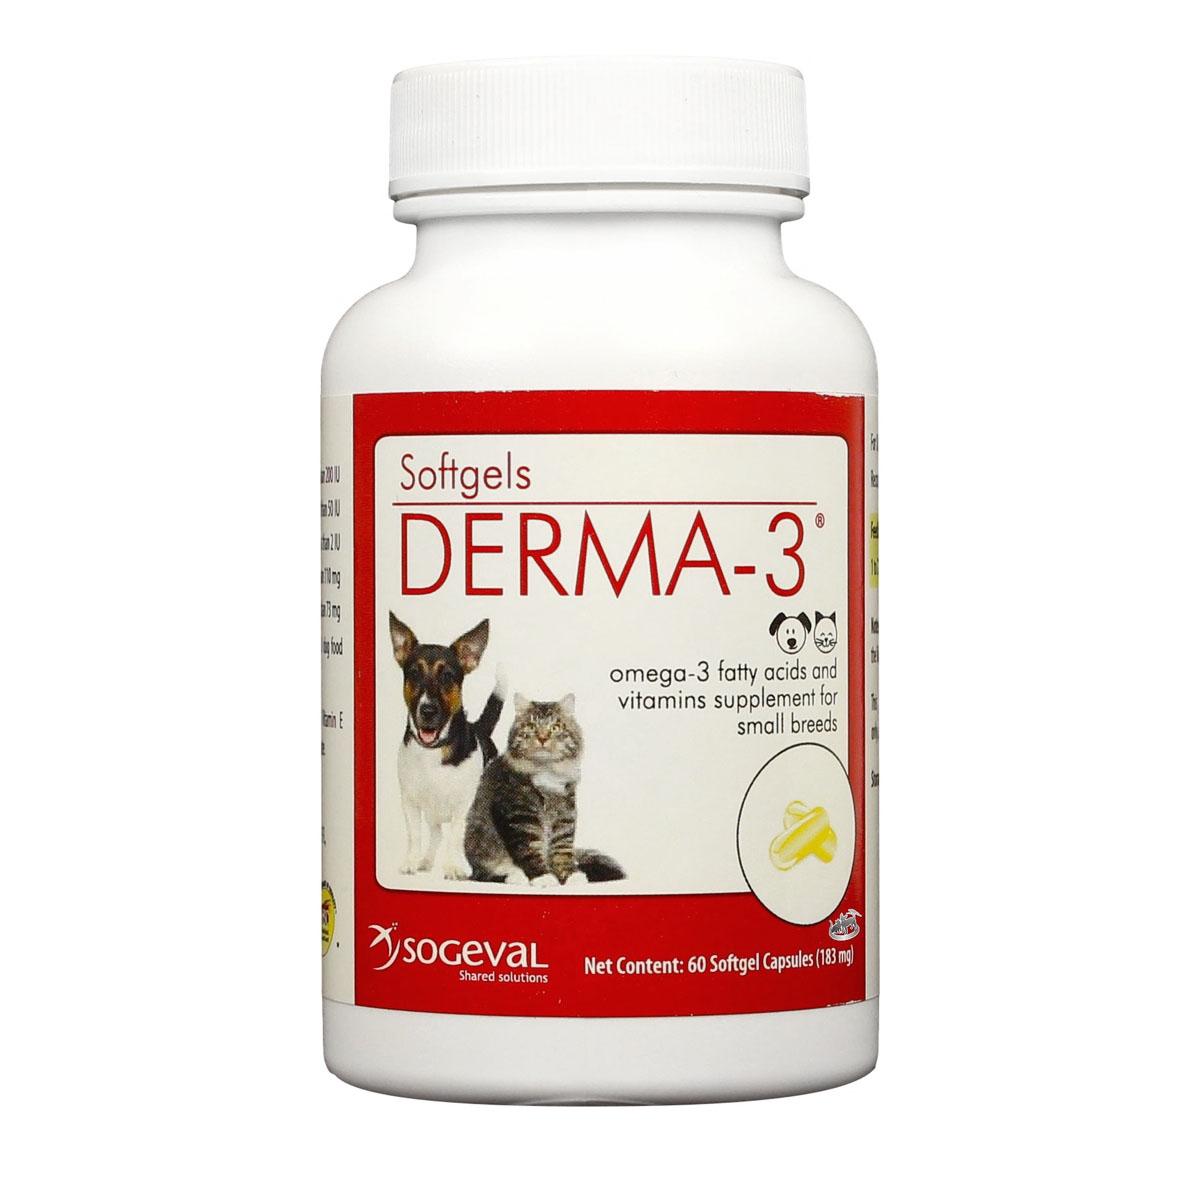 Sogeval Derma-3 Softgels Fatty Acid Supplement For Dogs and Cats